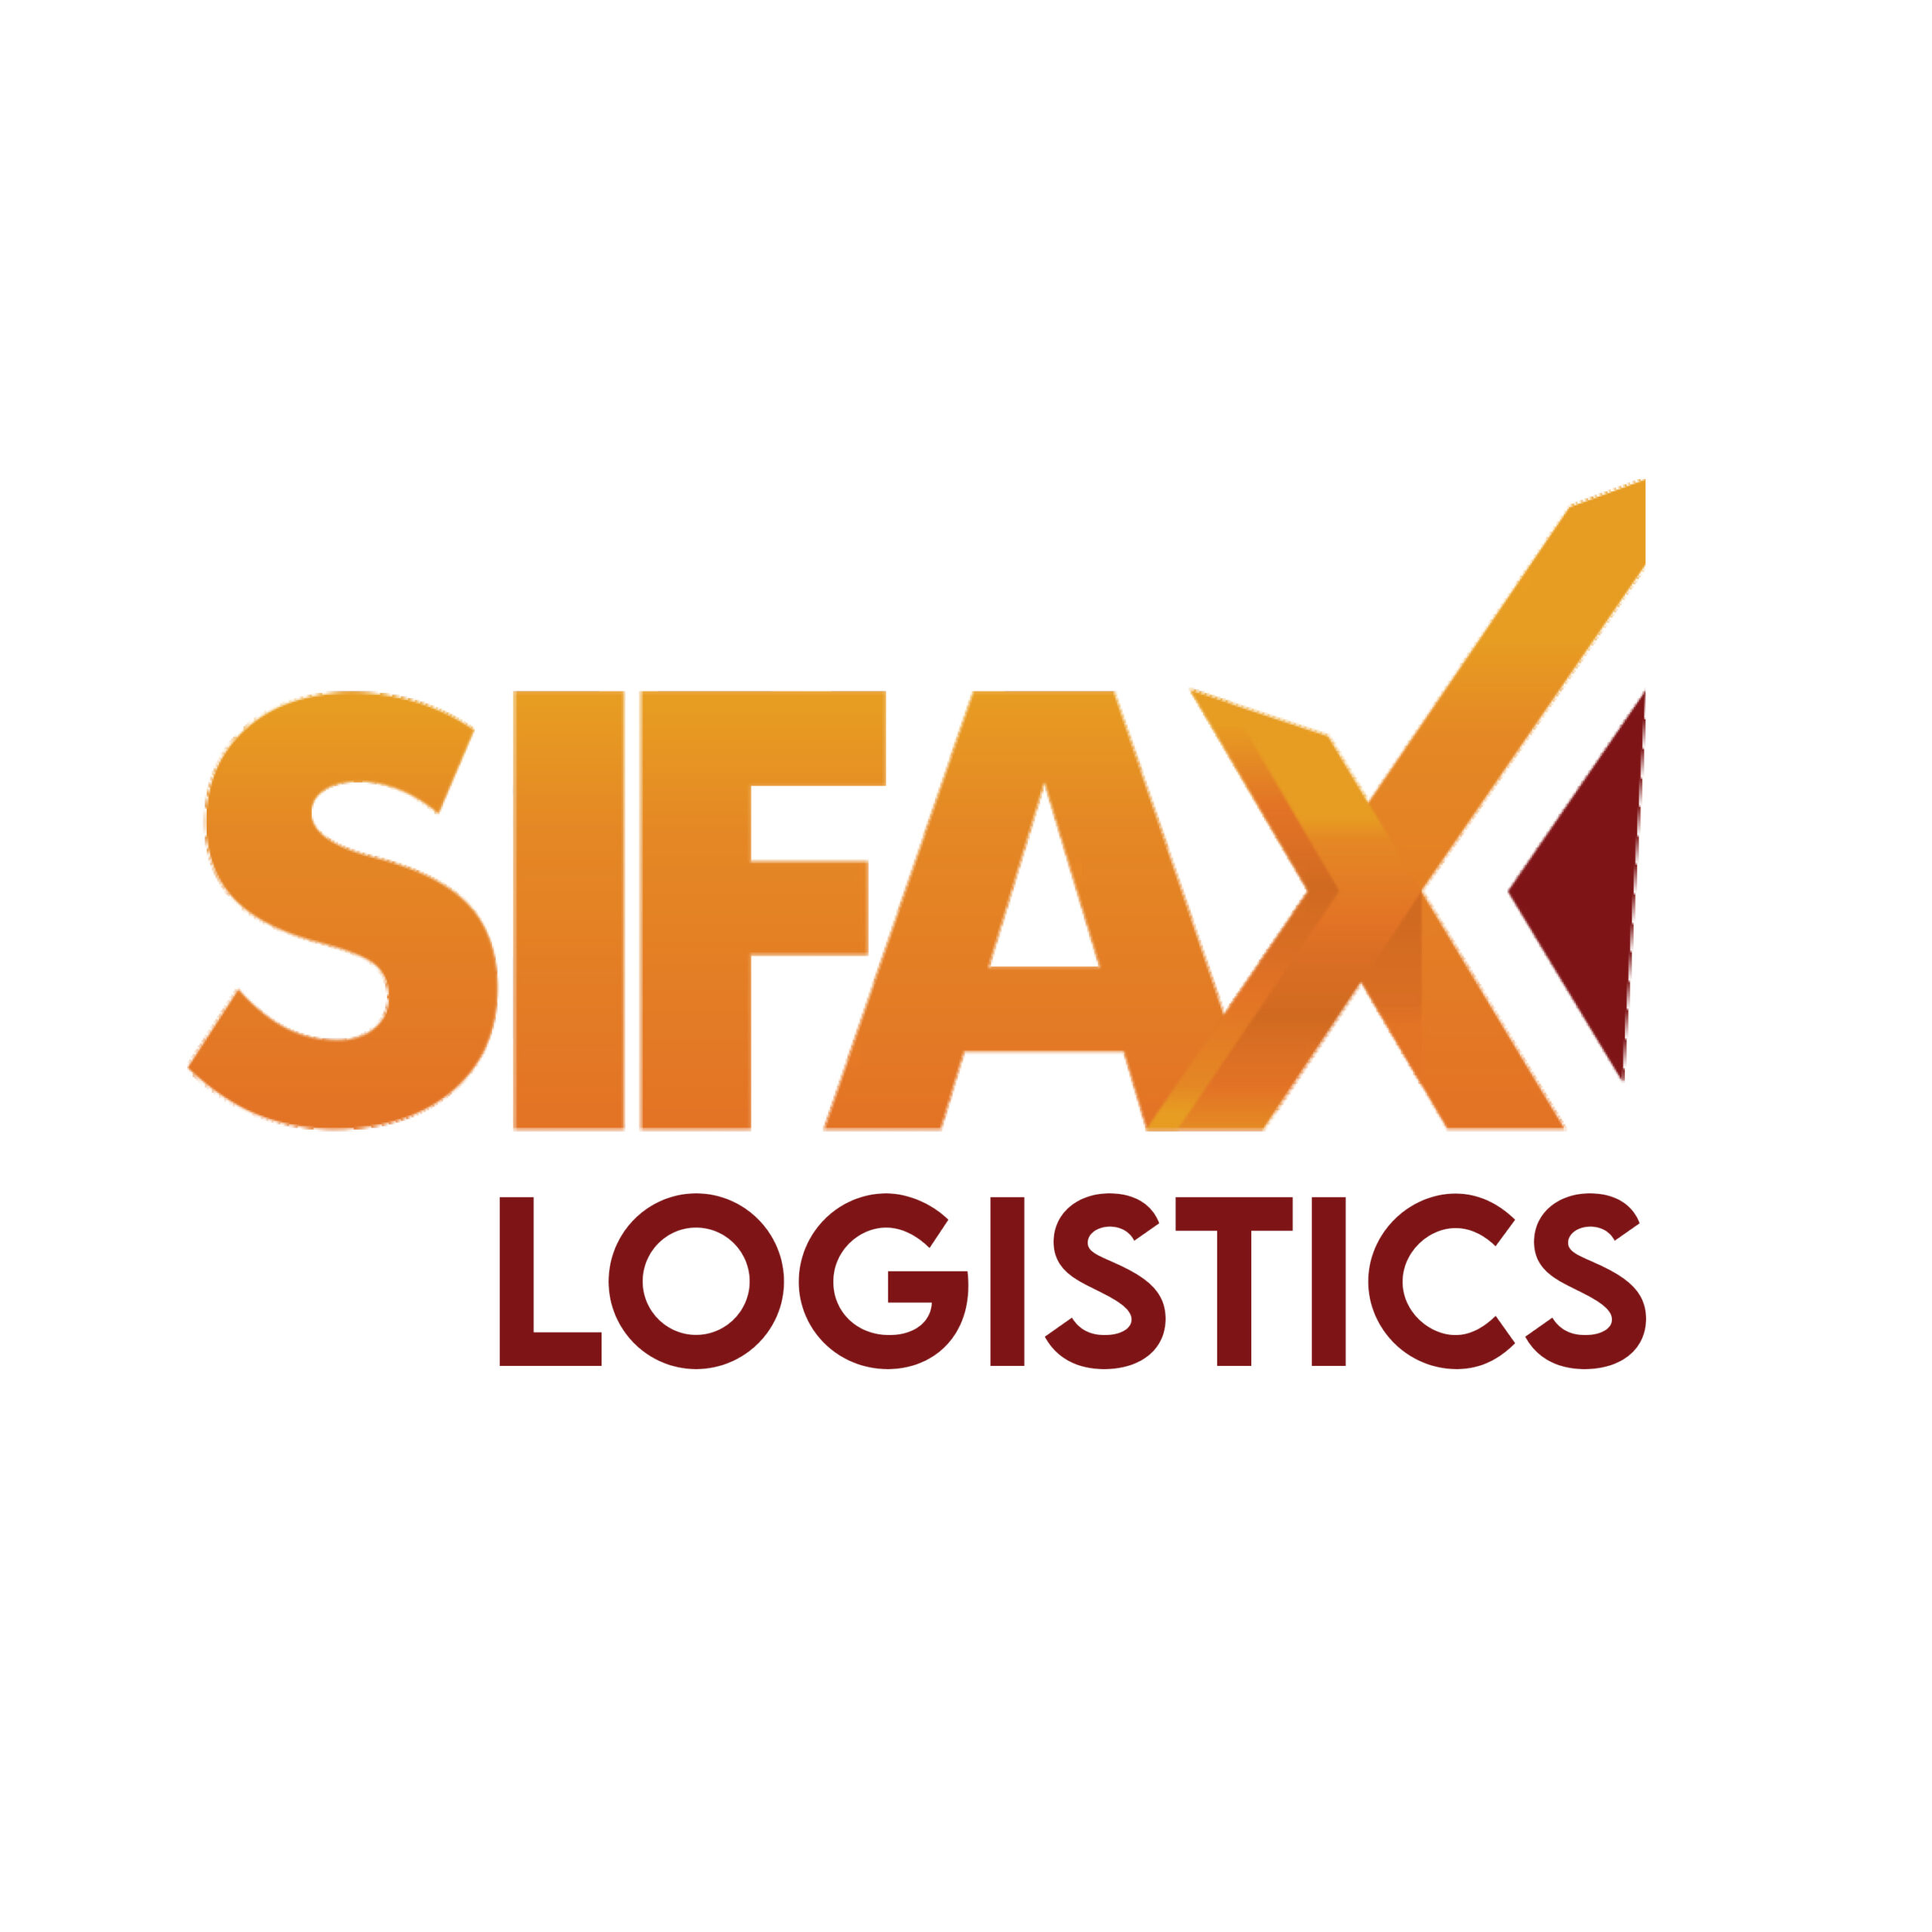 SIFAX Logistics expands haulage capacity, acquires 25 new trucks